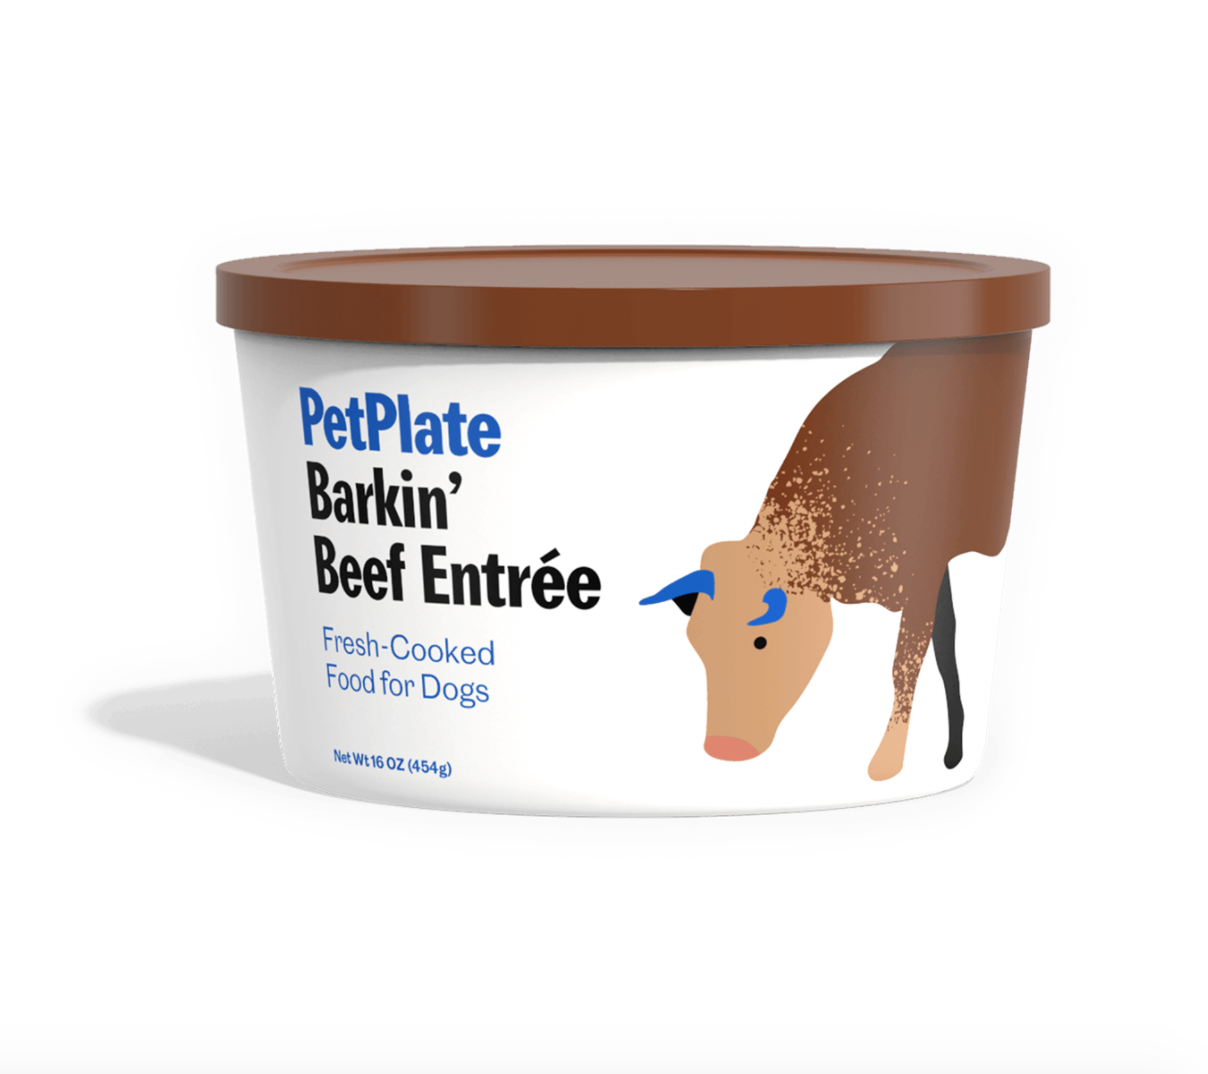 PetPlate on Sale in The Dapple's Black Friday Sales Round Up for Dog Lovers Including Dog Treats, Dog Toys, and Dog Beds on Sale